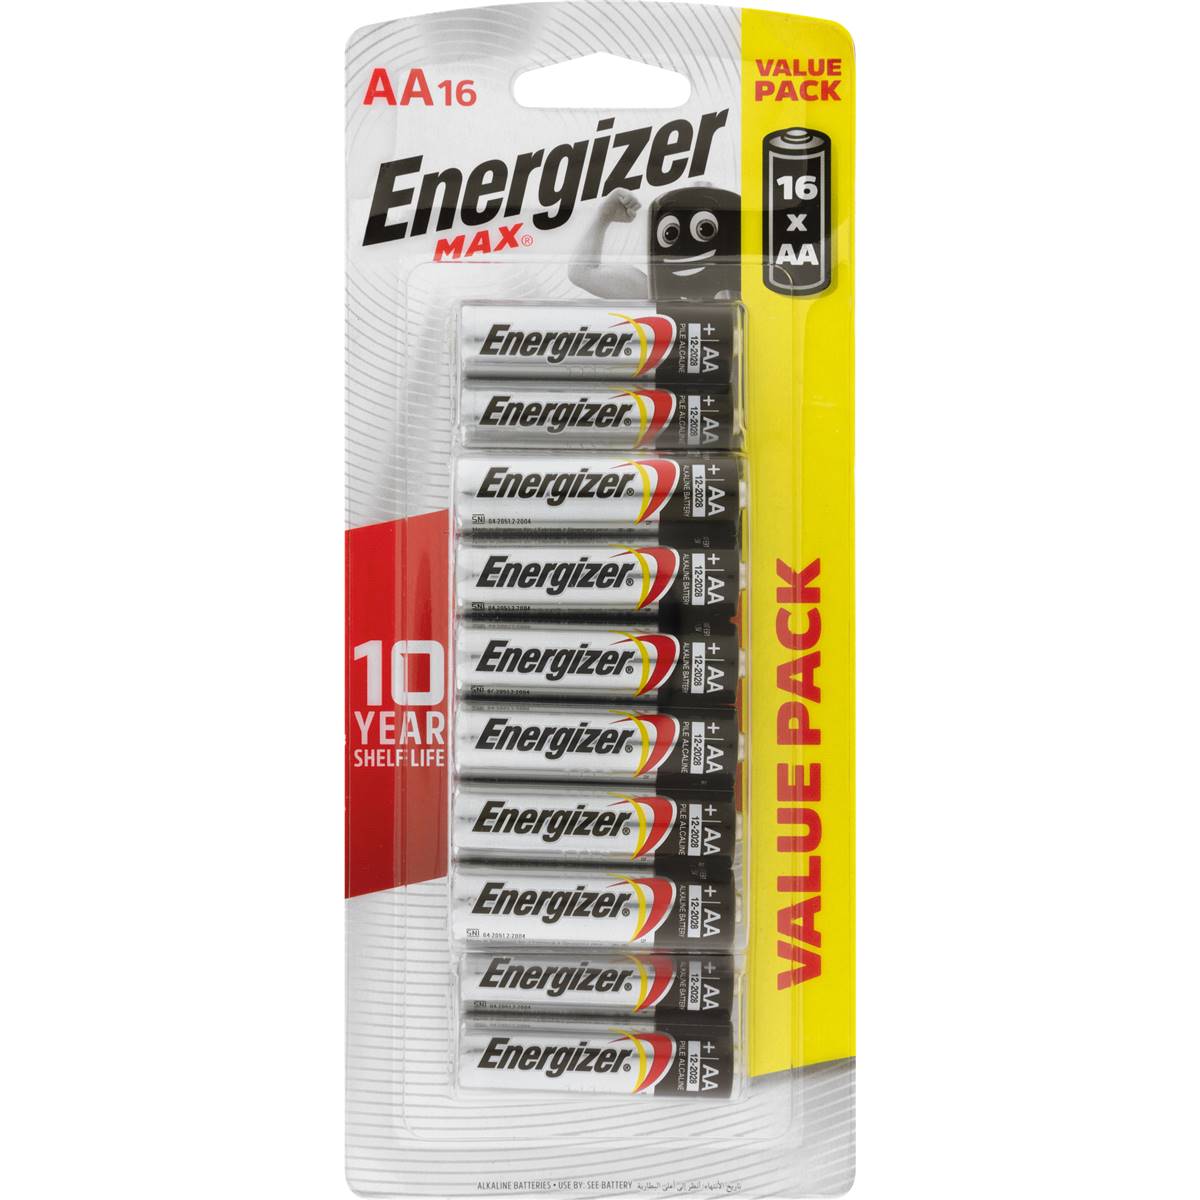 Energizer Max Alkaline Battery 1.5V AA 16Pc Value Pack E91HP16TX - Double Bay Hardware